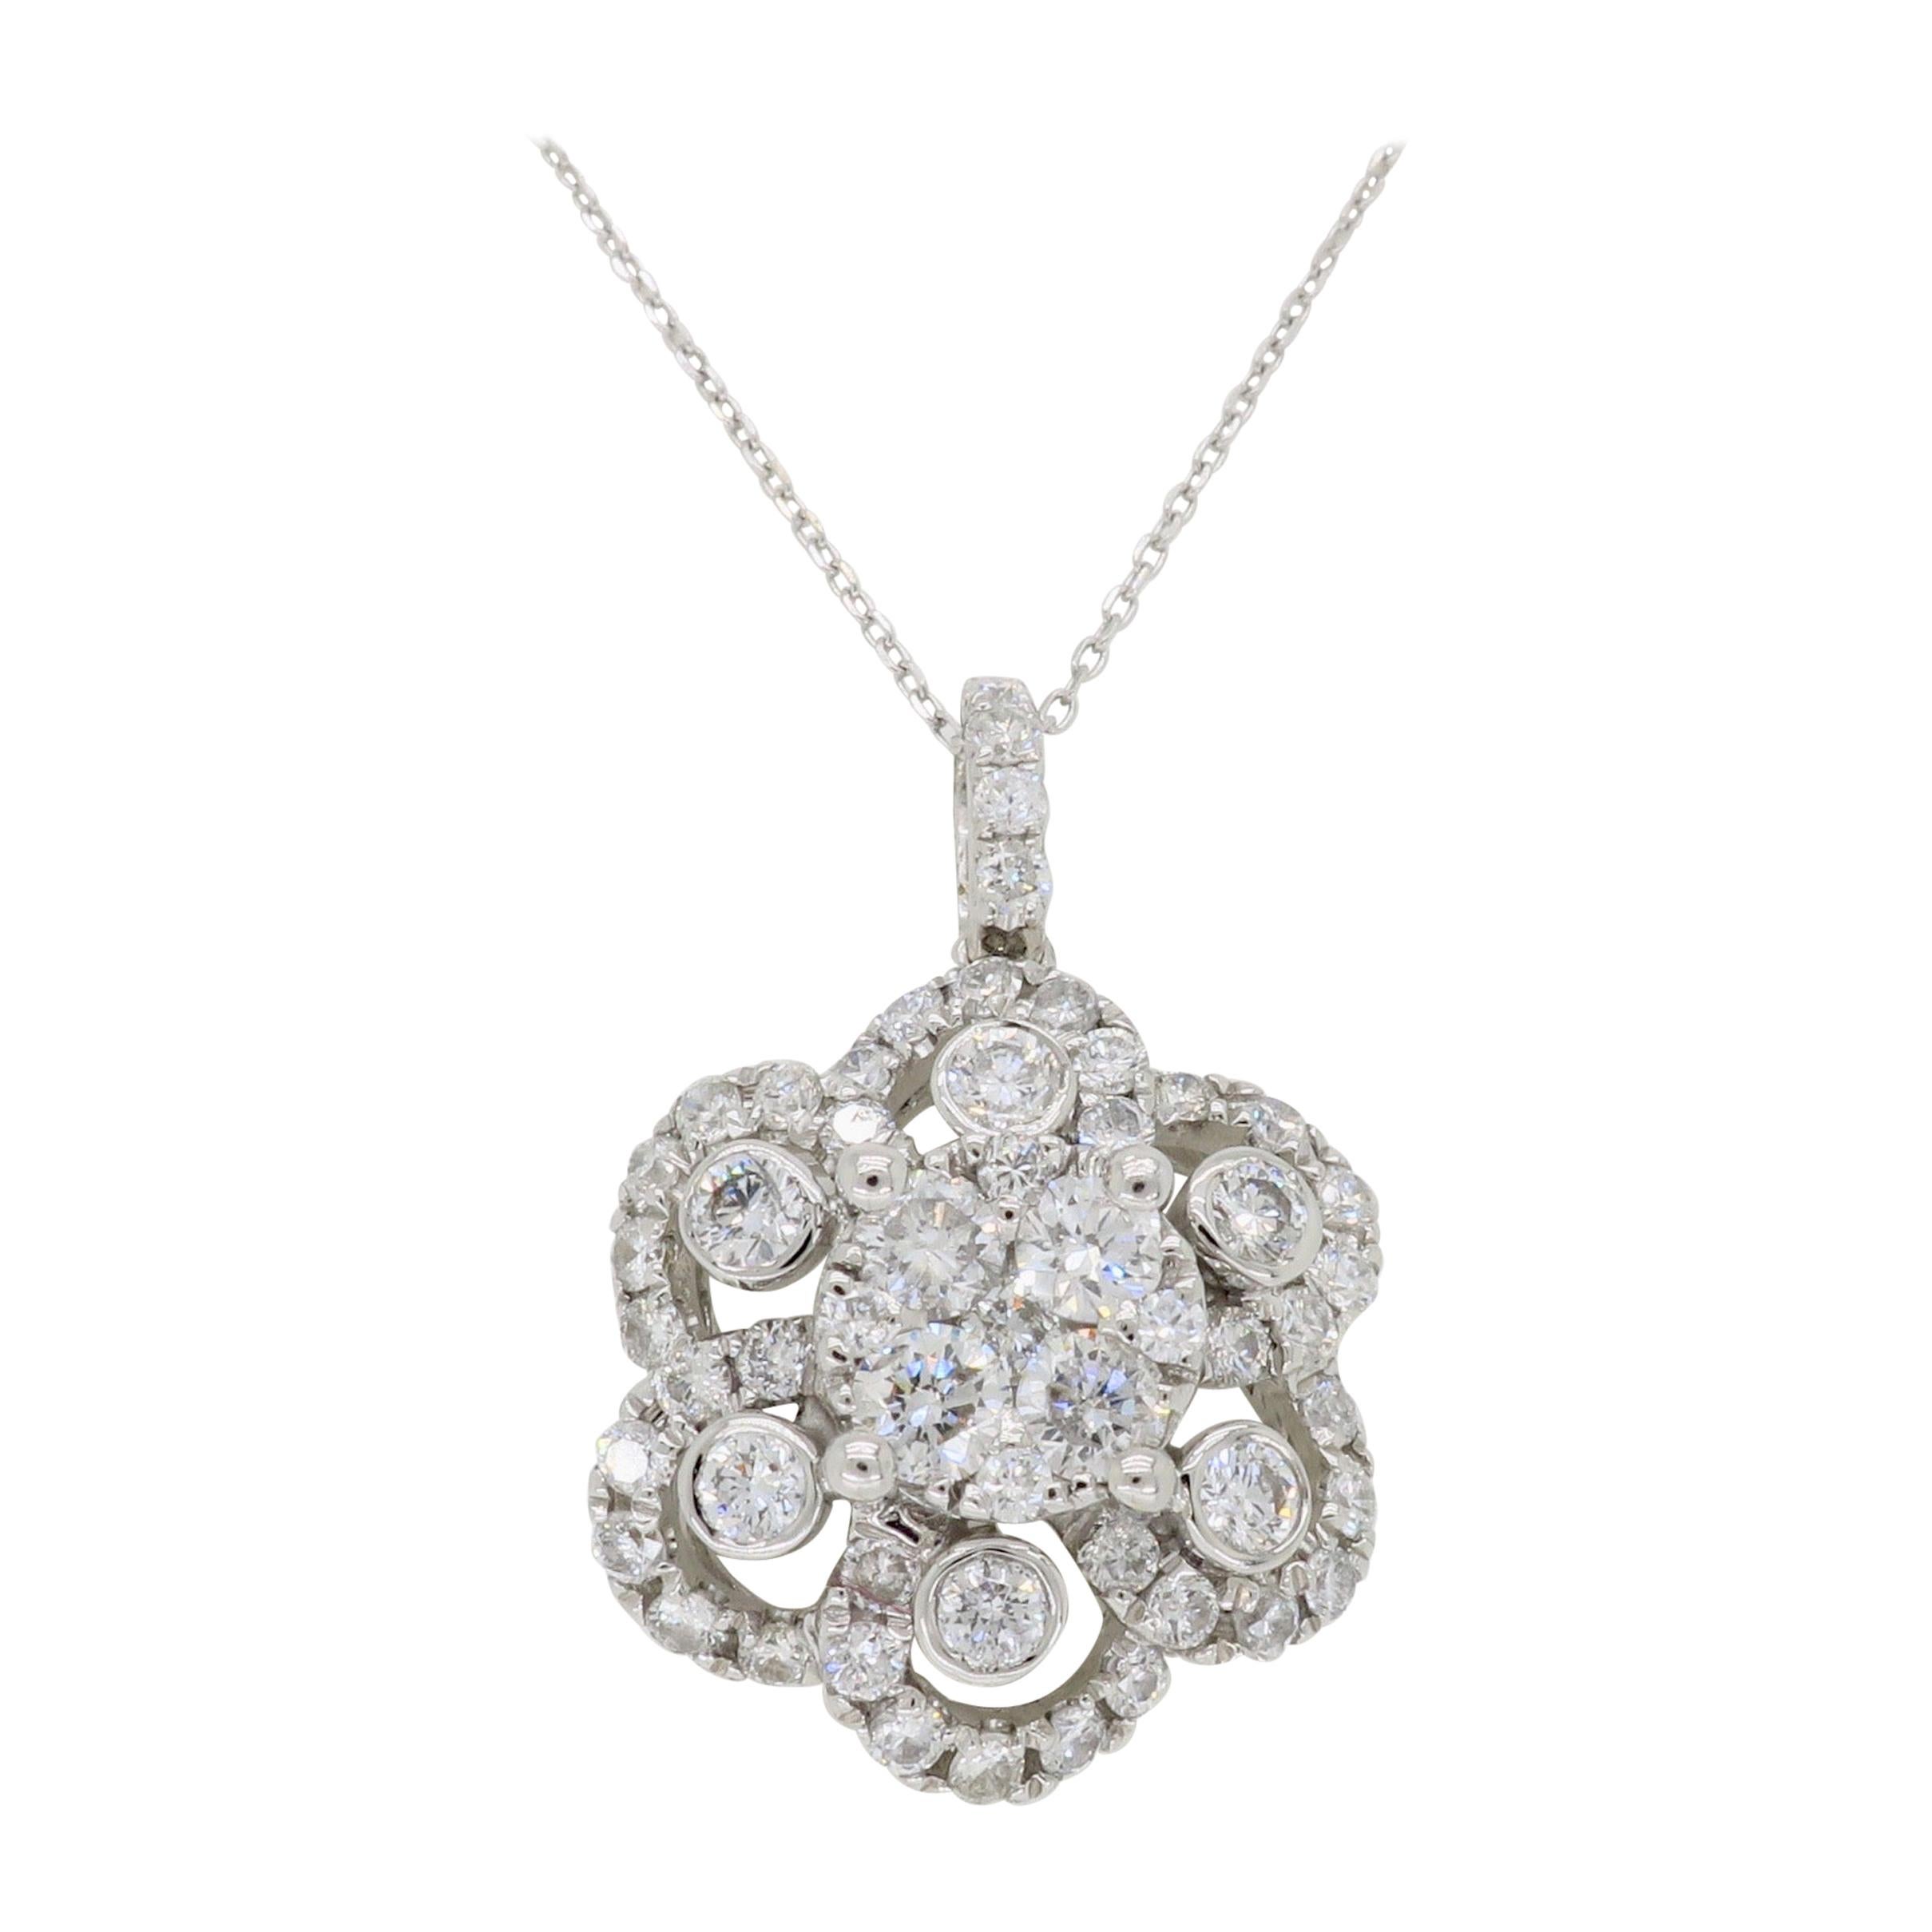 Floral Diamond Pendant Necklace in White Gold